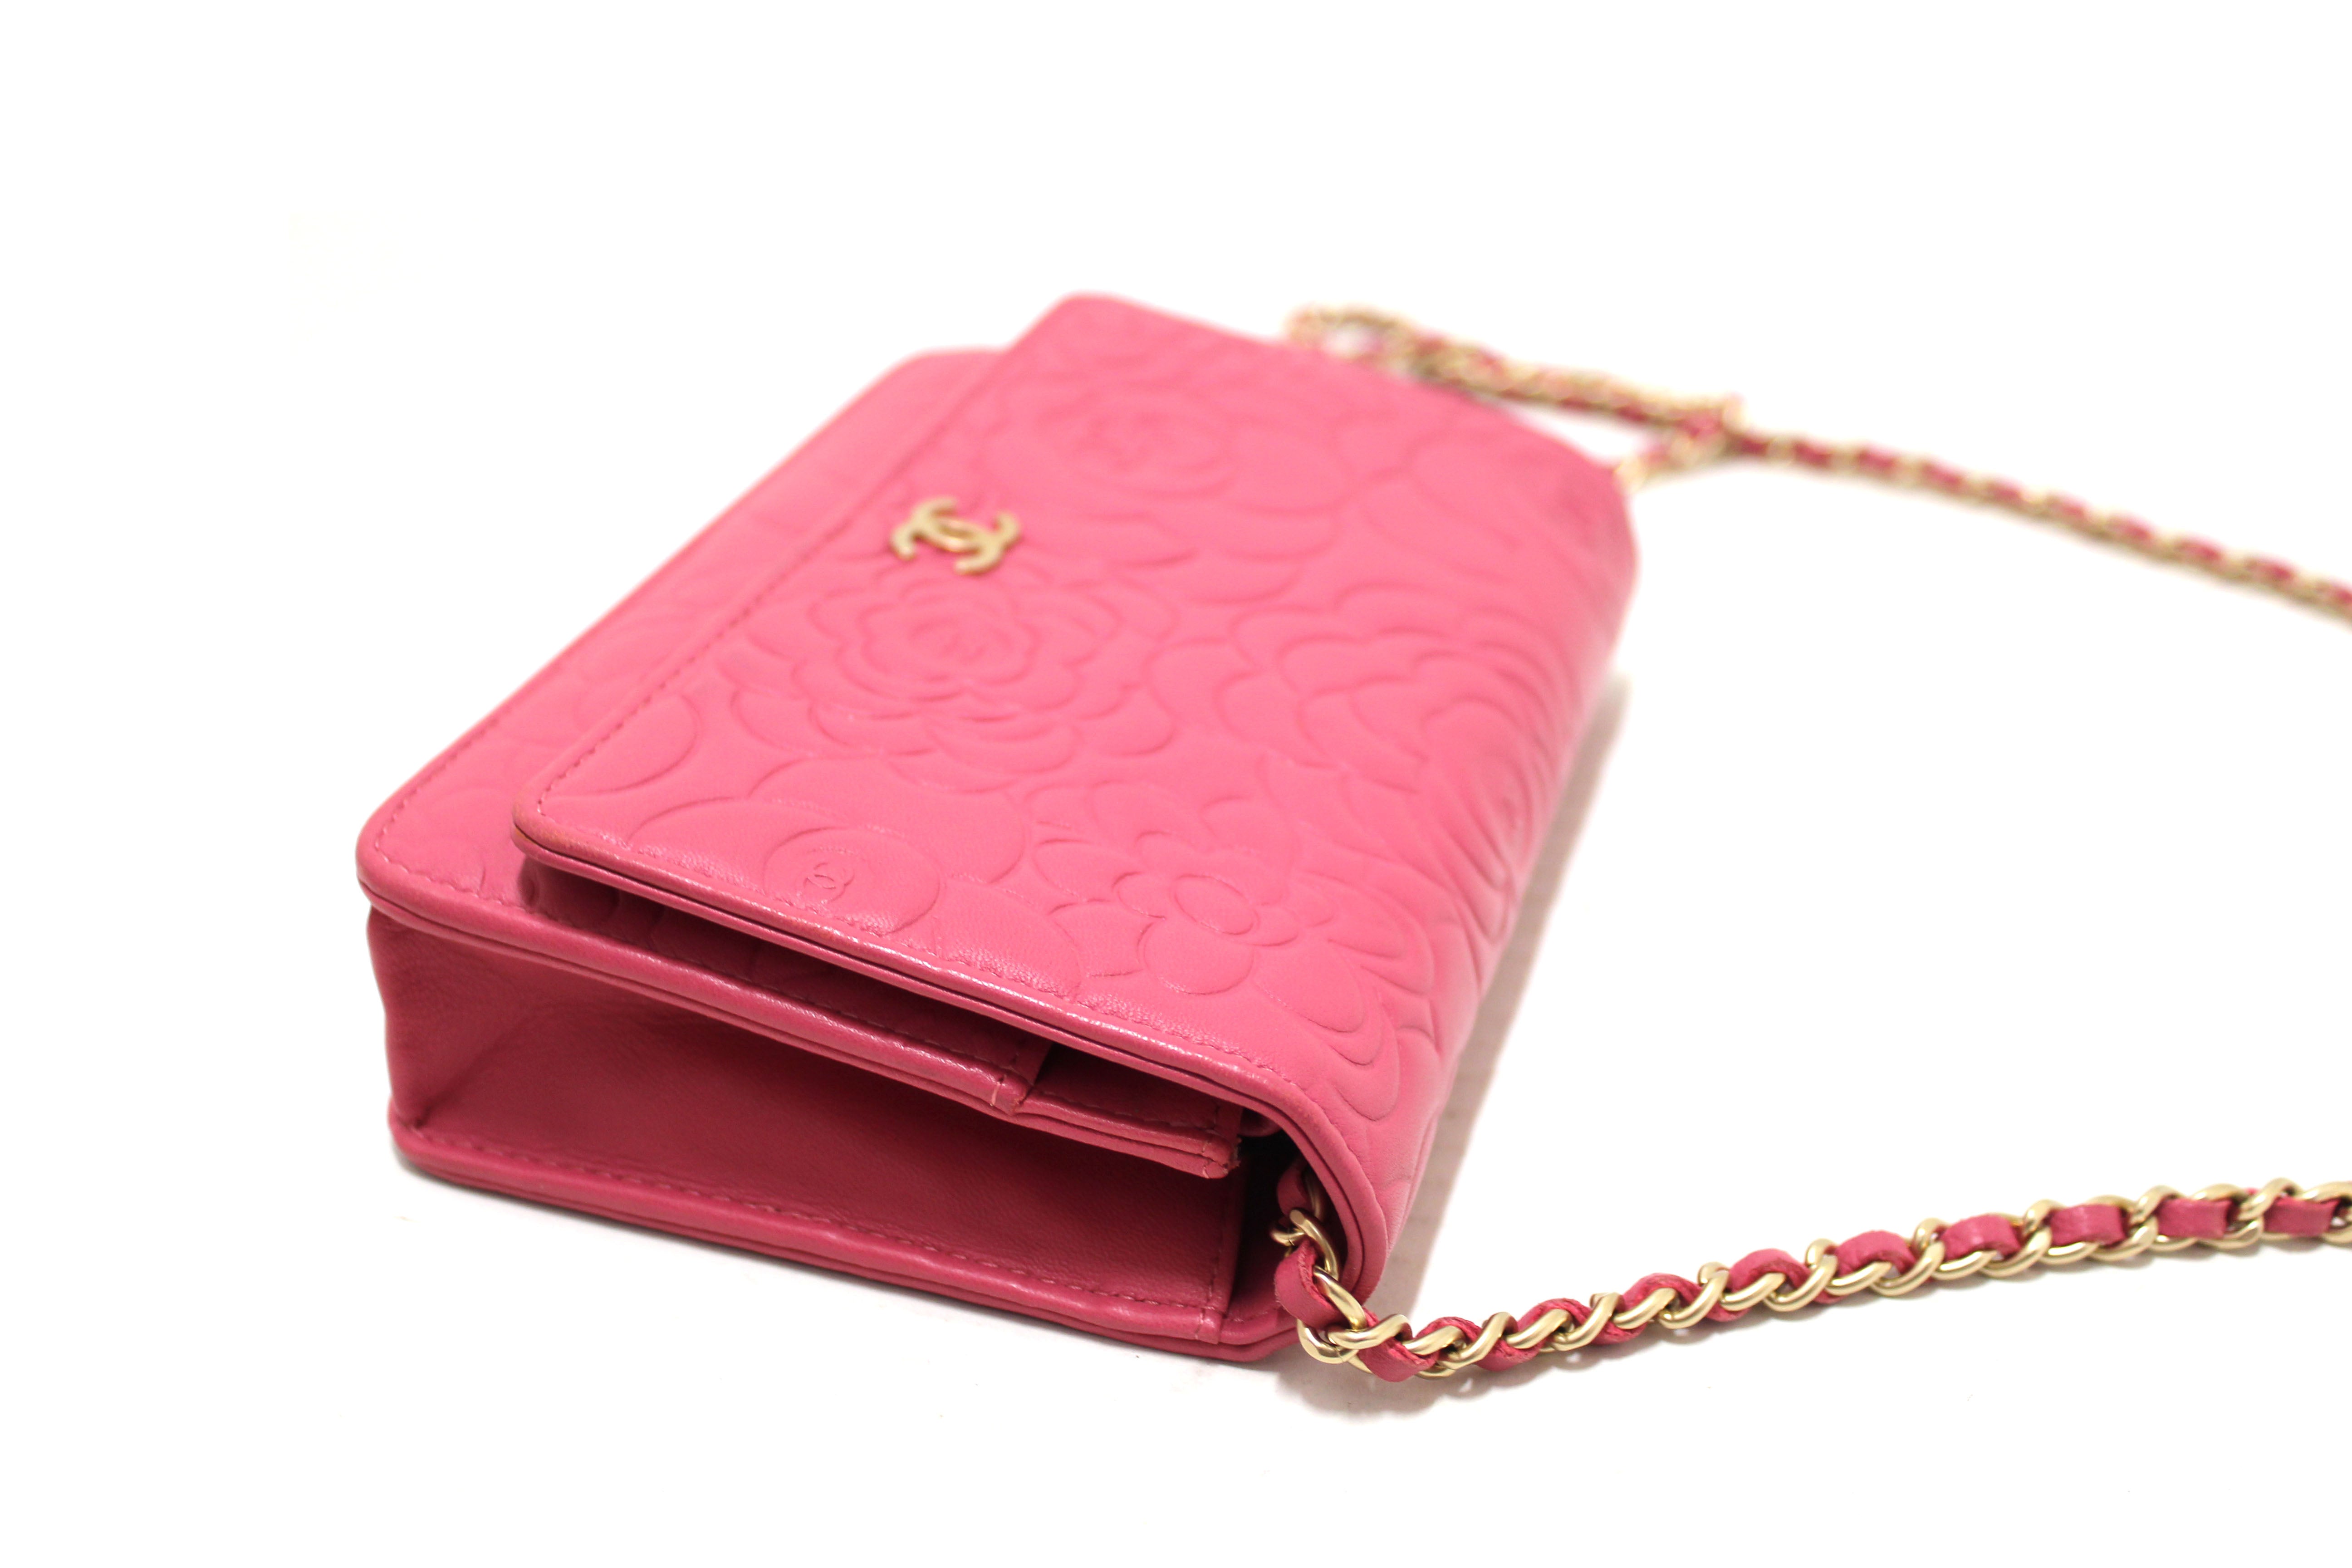 Authentic Chanel Pink Camellia Lambskin Leather Wallet On Chain/Clutch Bag